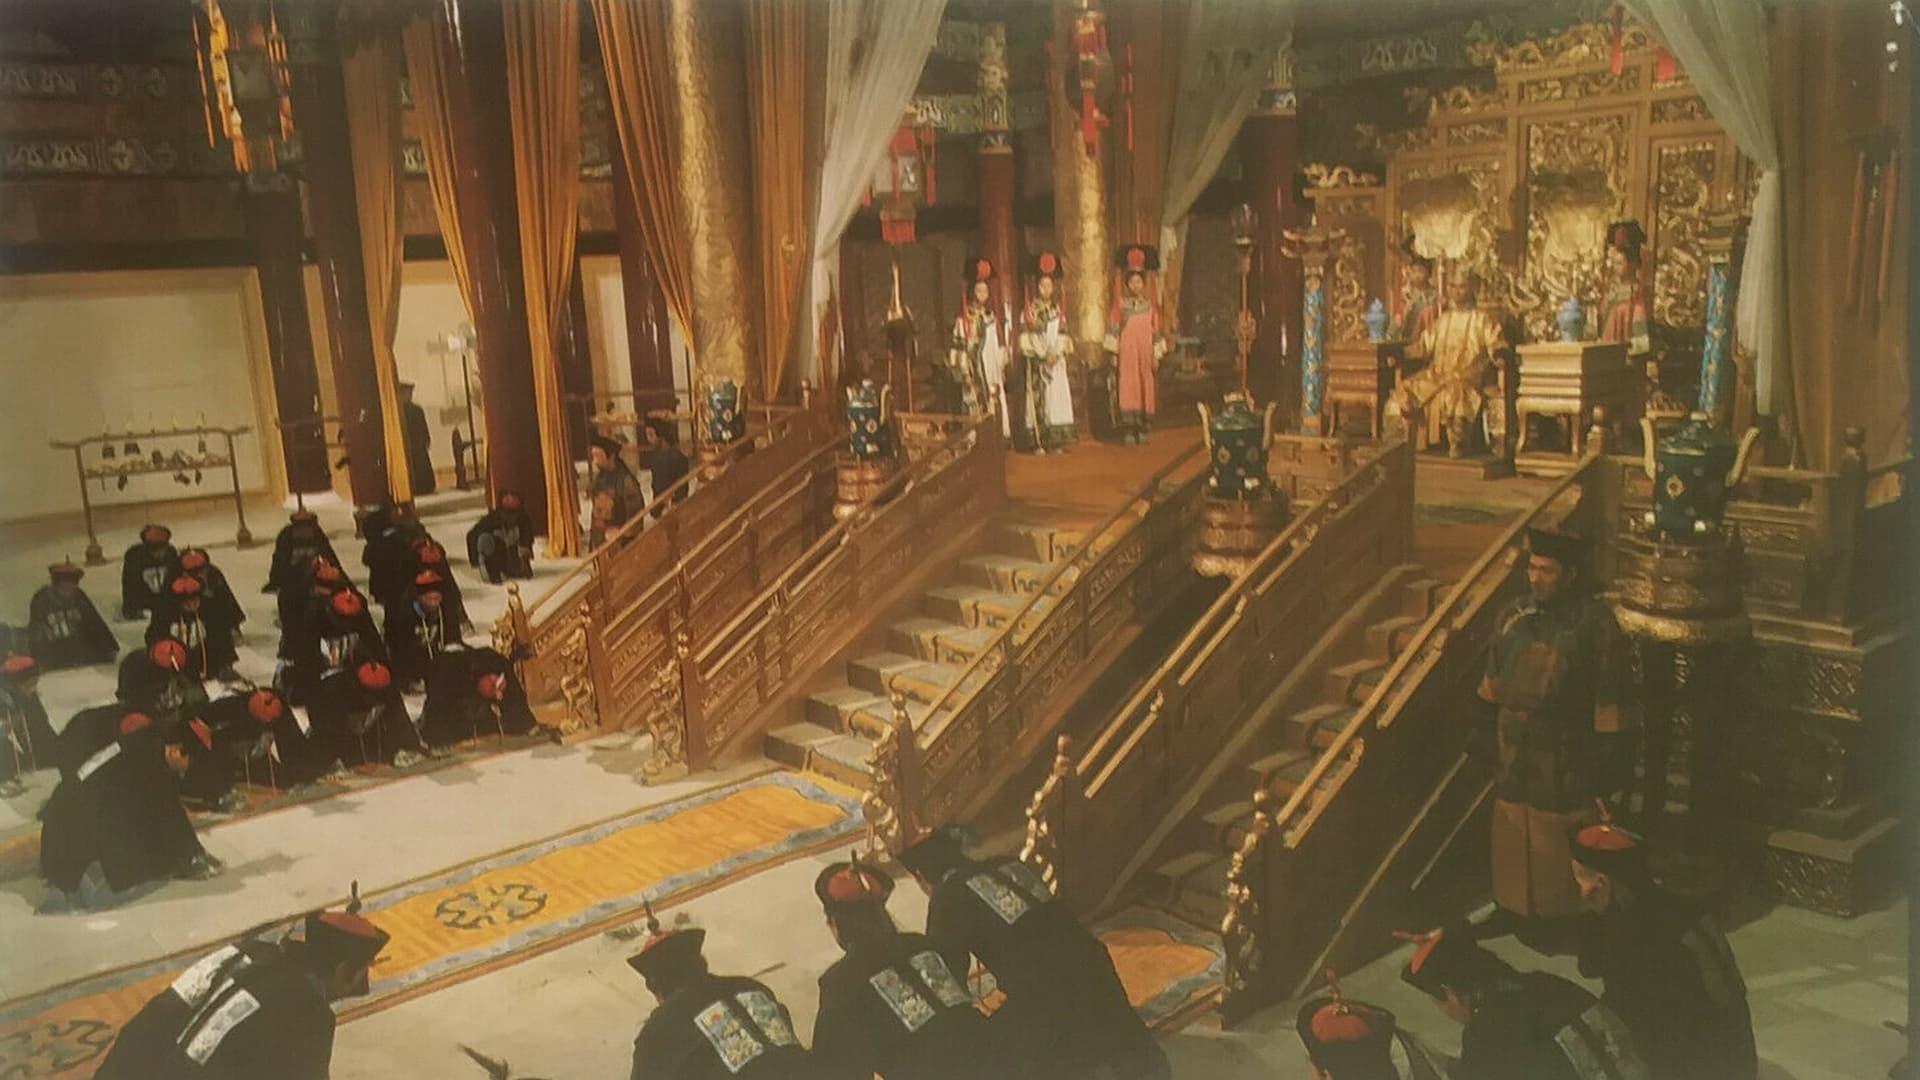 The Emperor and the Minister backdrop